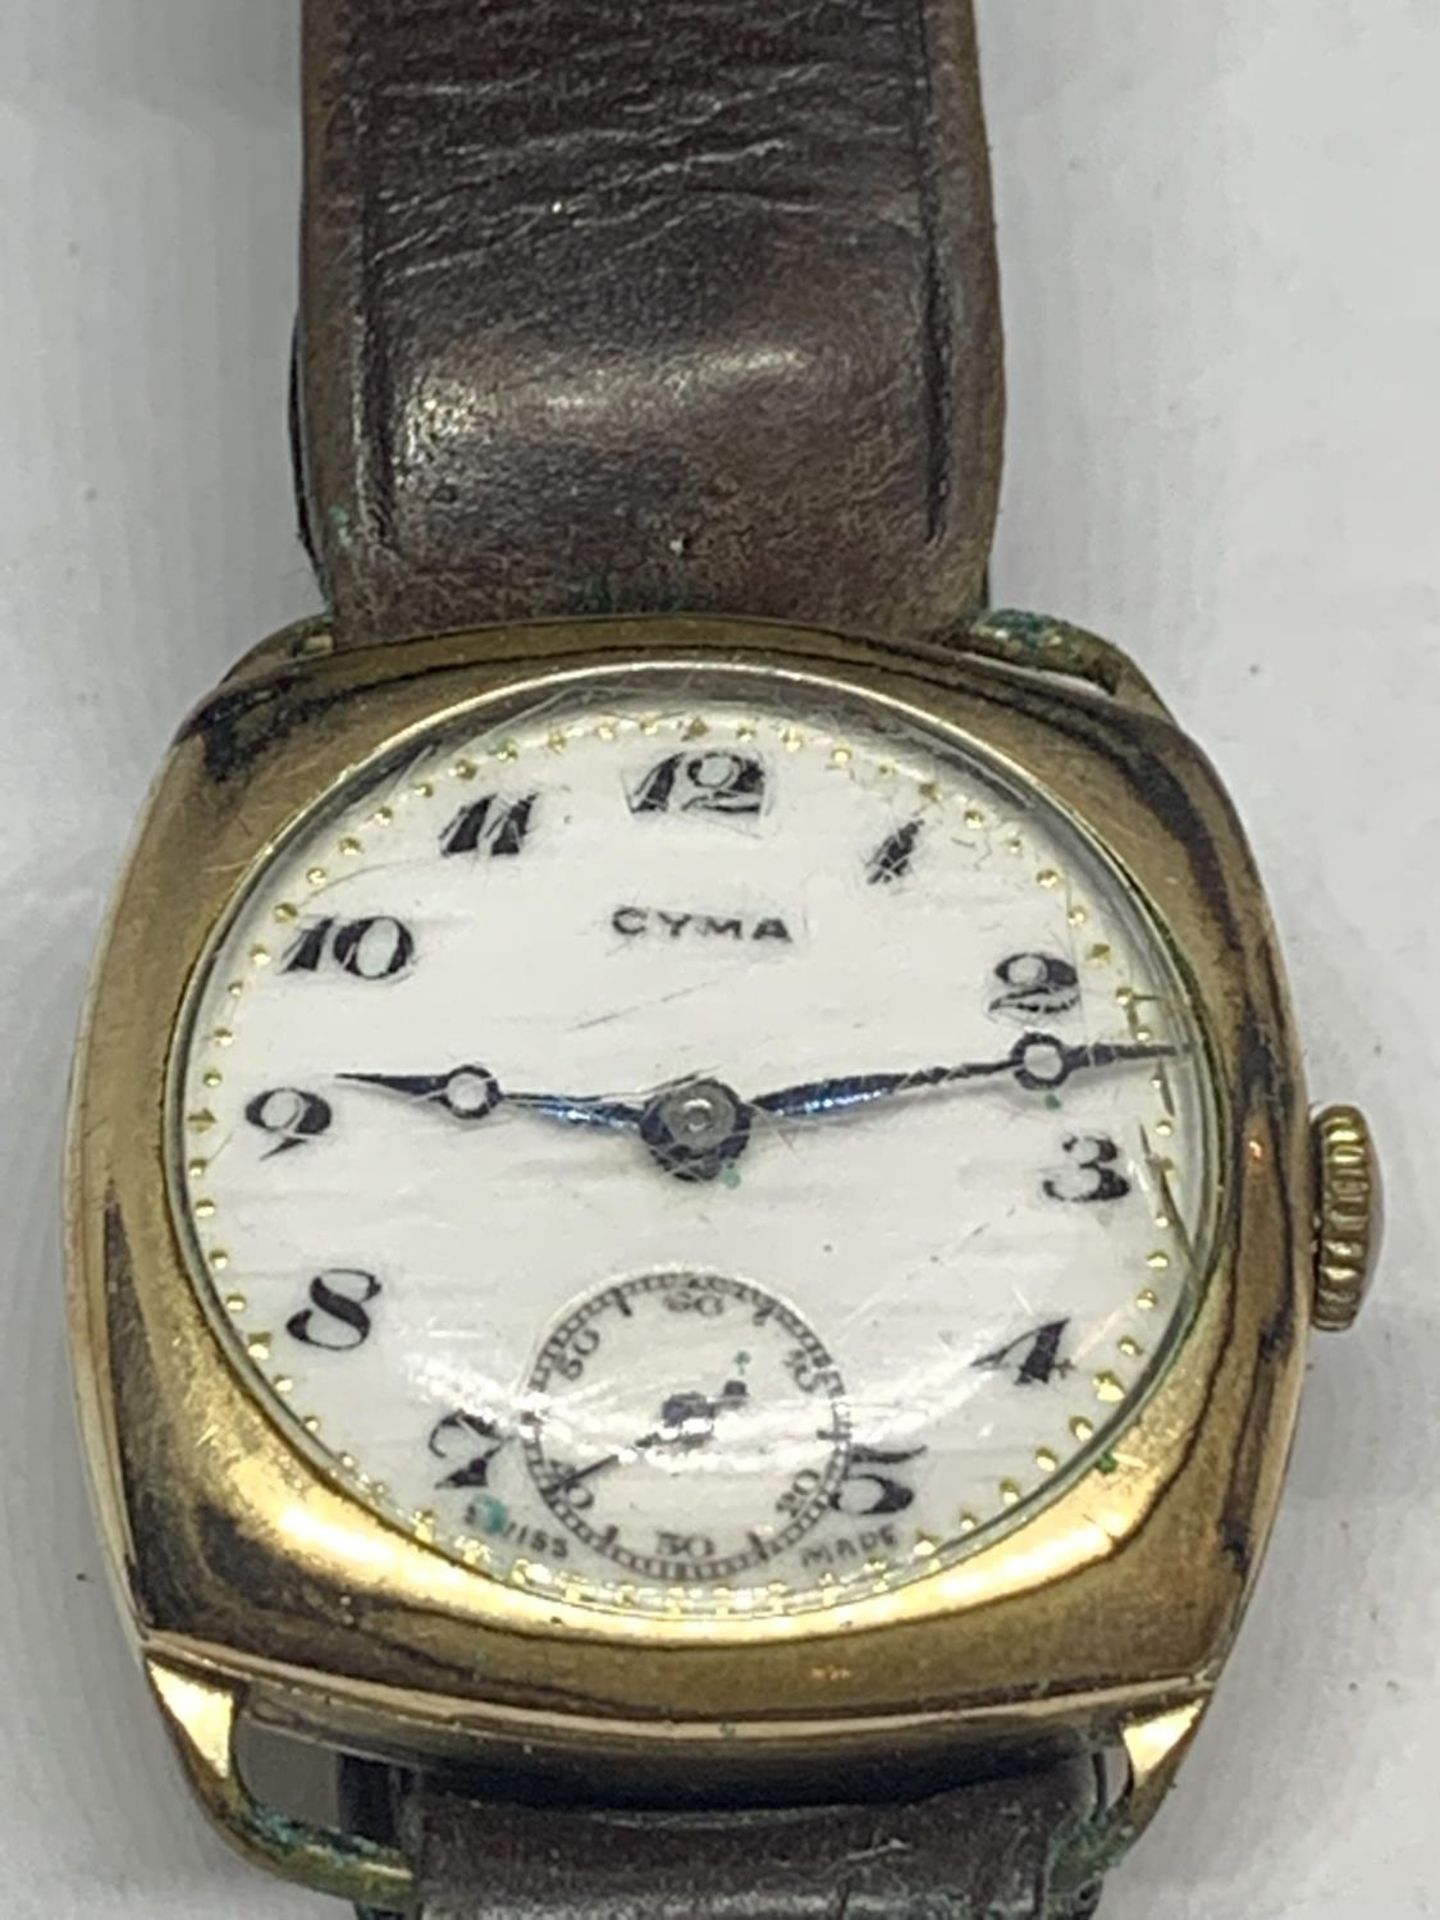 A VINTAGE CYMA GOLD PLATED WRIST WATCH SEEN WORKING BUT NO WARRANTY - Image 2 of 4